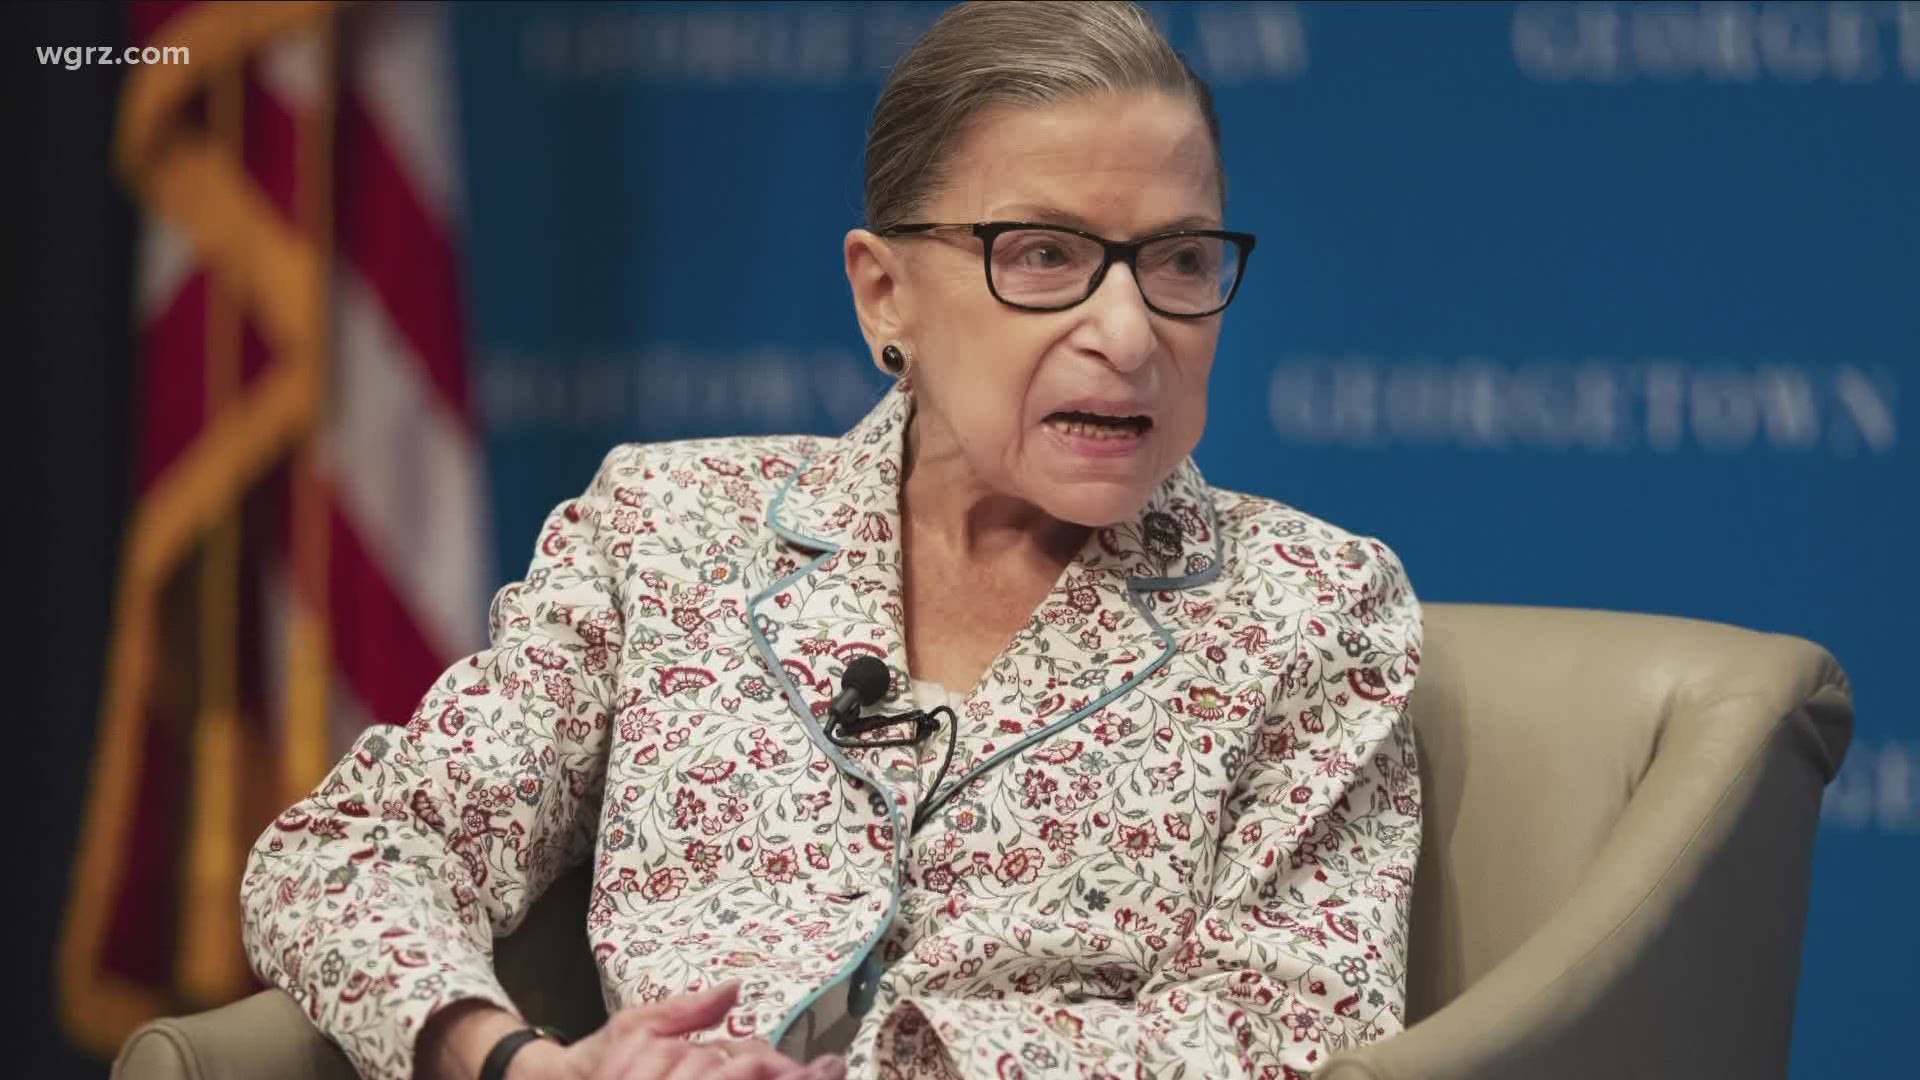 Justice Ginsburg battled pancreatic cancer for several years leading up to her death. It's one of the harder forms of cancer to detect.